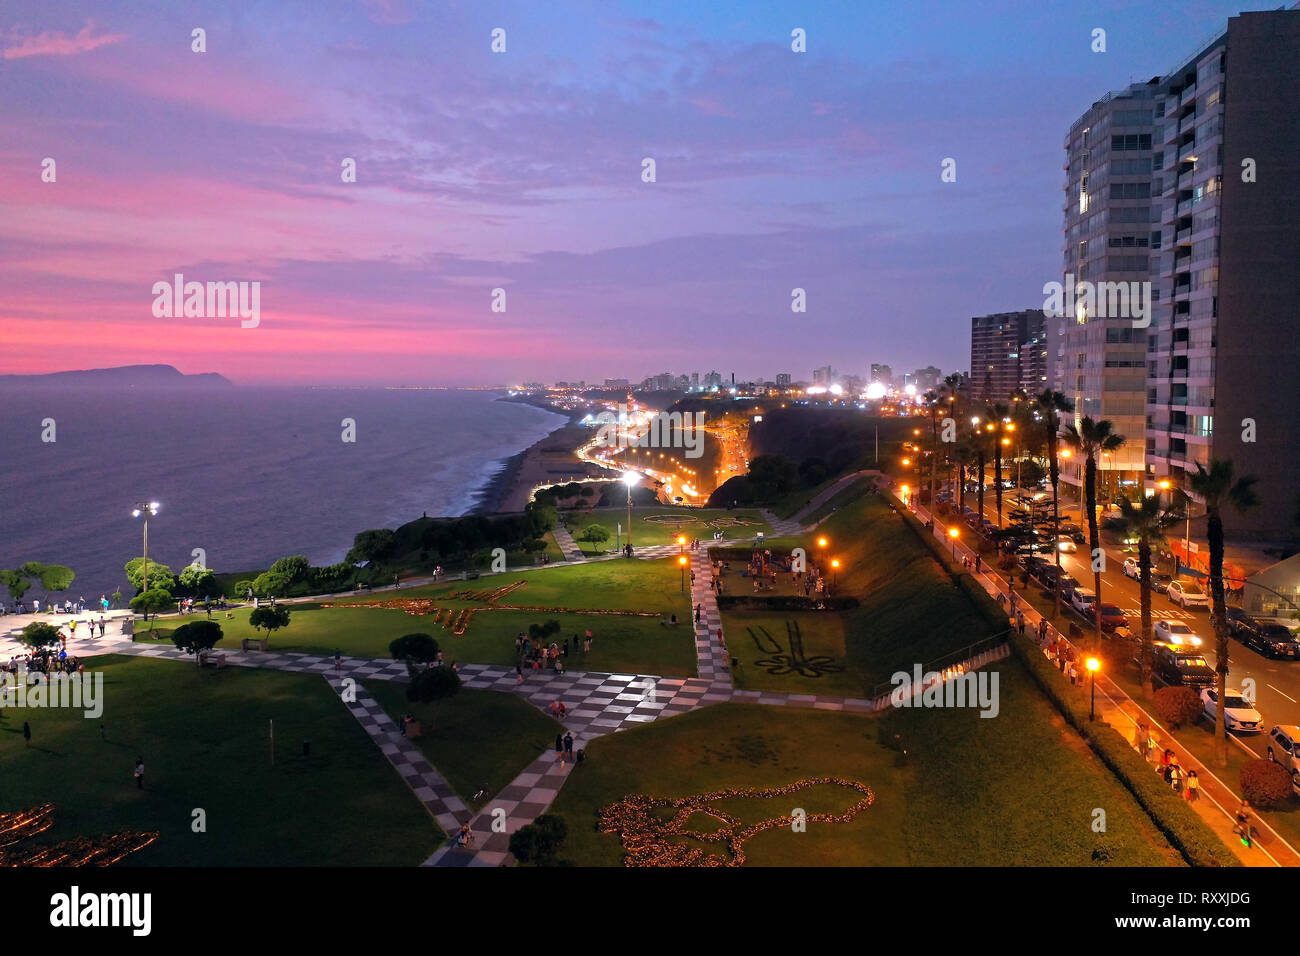 Aerial view of Maria Reiche Park at sunset with scenic seascape on the background. Tourists, families and kids playing and walking around the park at Stock Photo